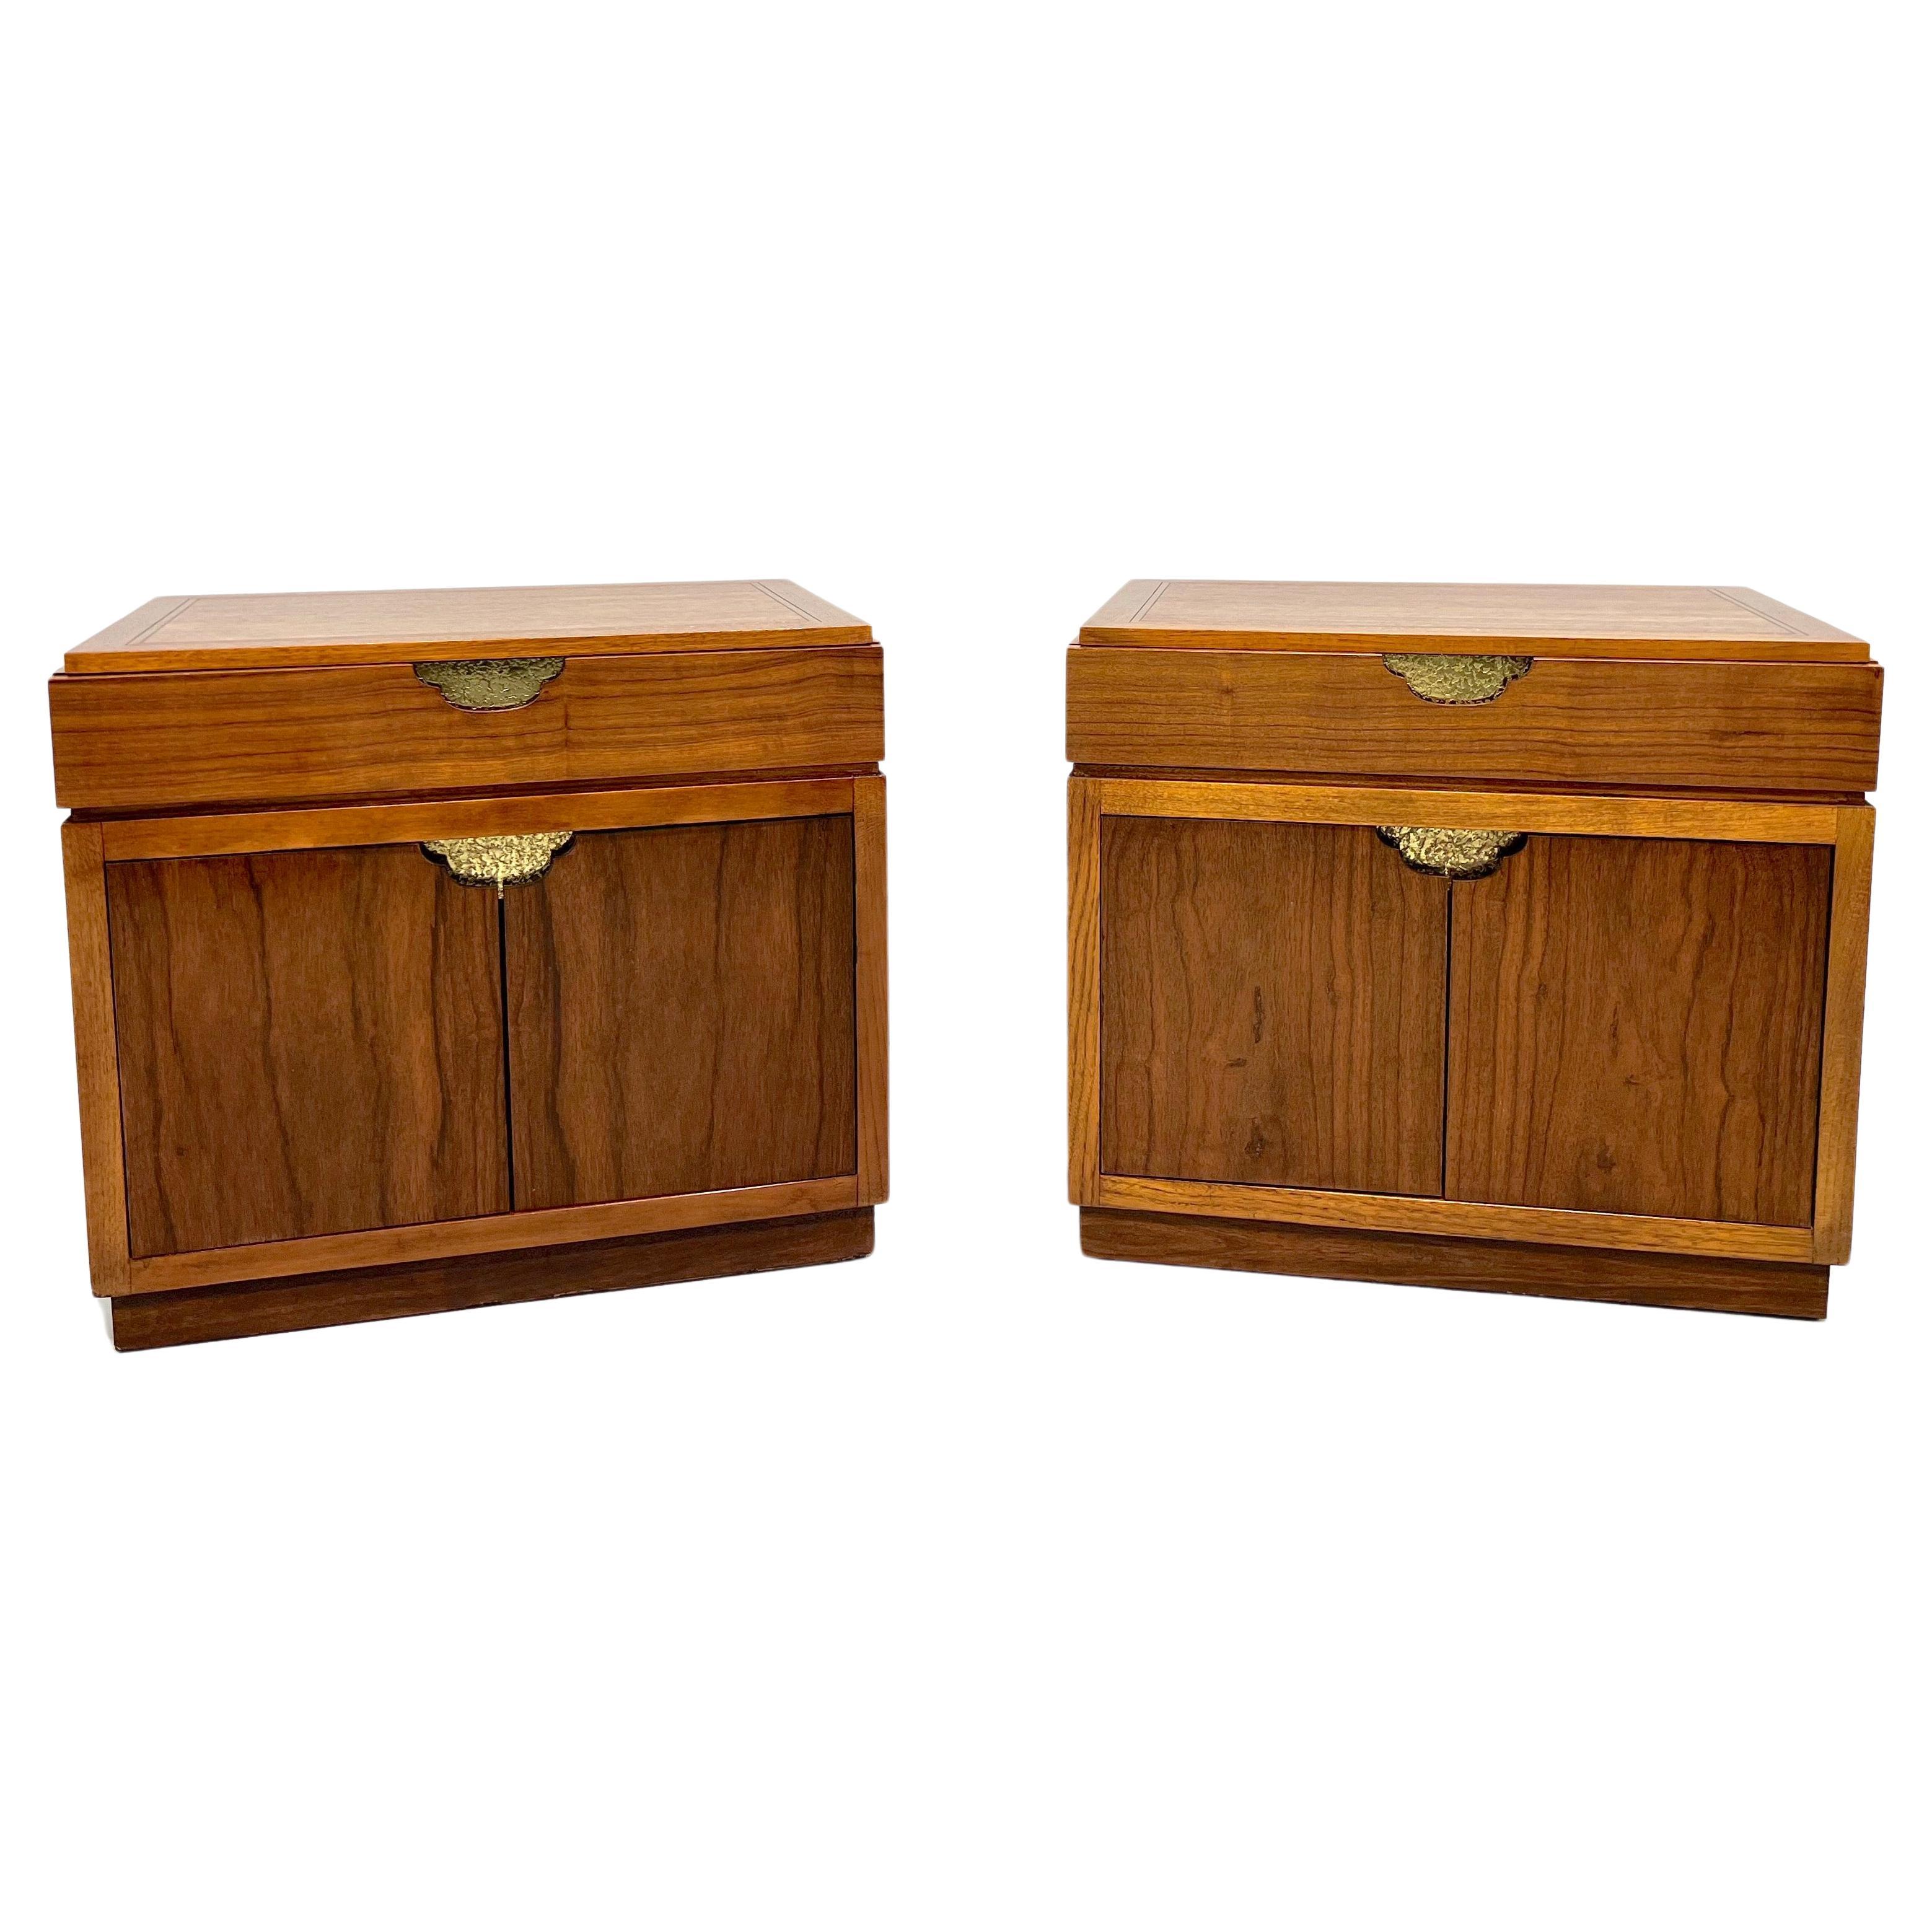 BAKER Mid 20th Century Rosewood & Walnut Asian Inspired Nightstands - Pair For Sale